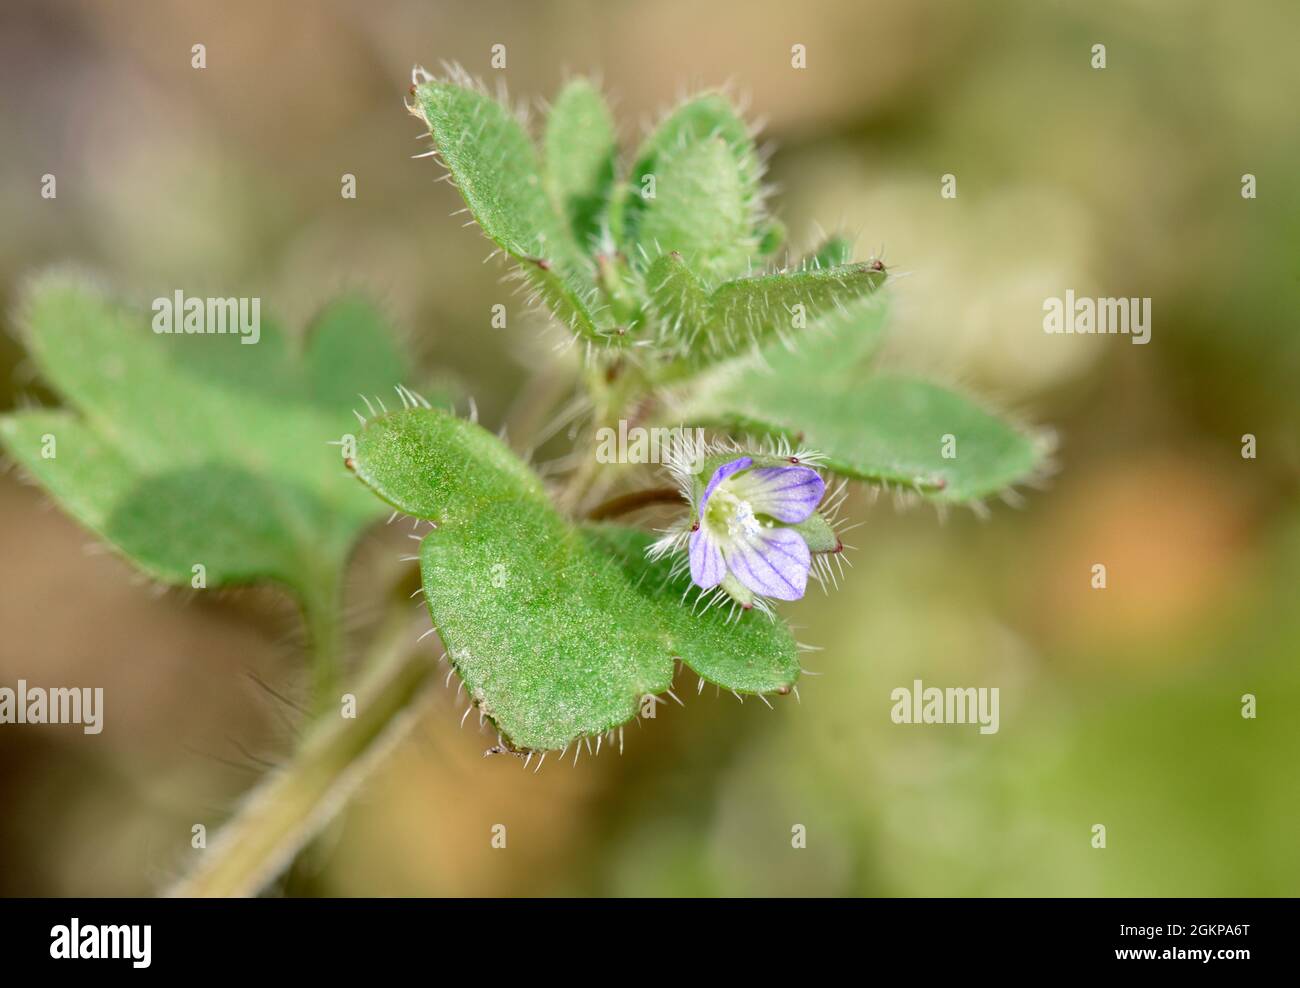 Ivy-leaved Speedwell - Veronica hederifolia Stock Photo